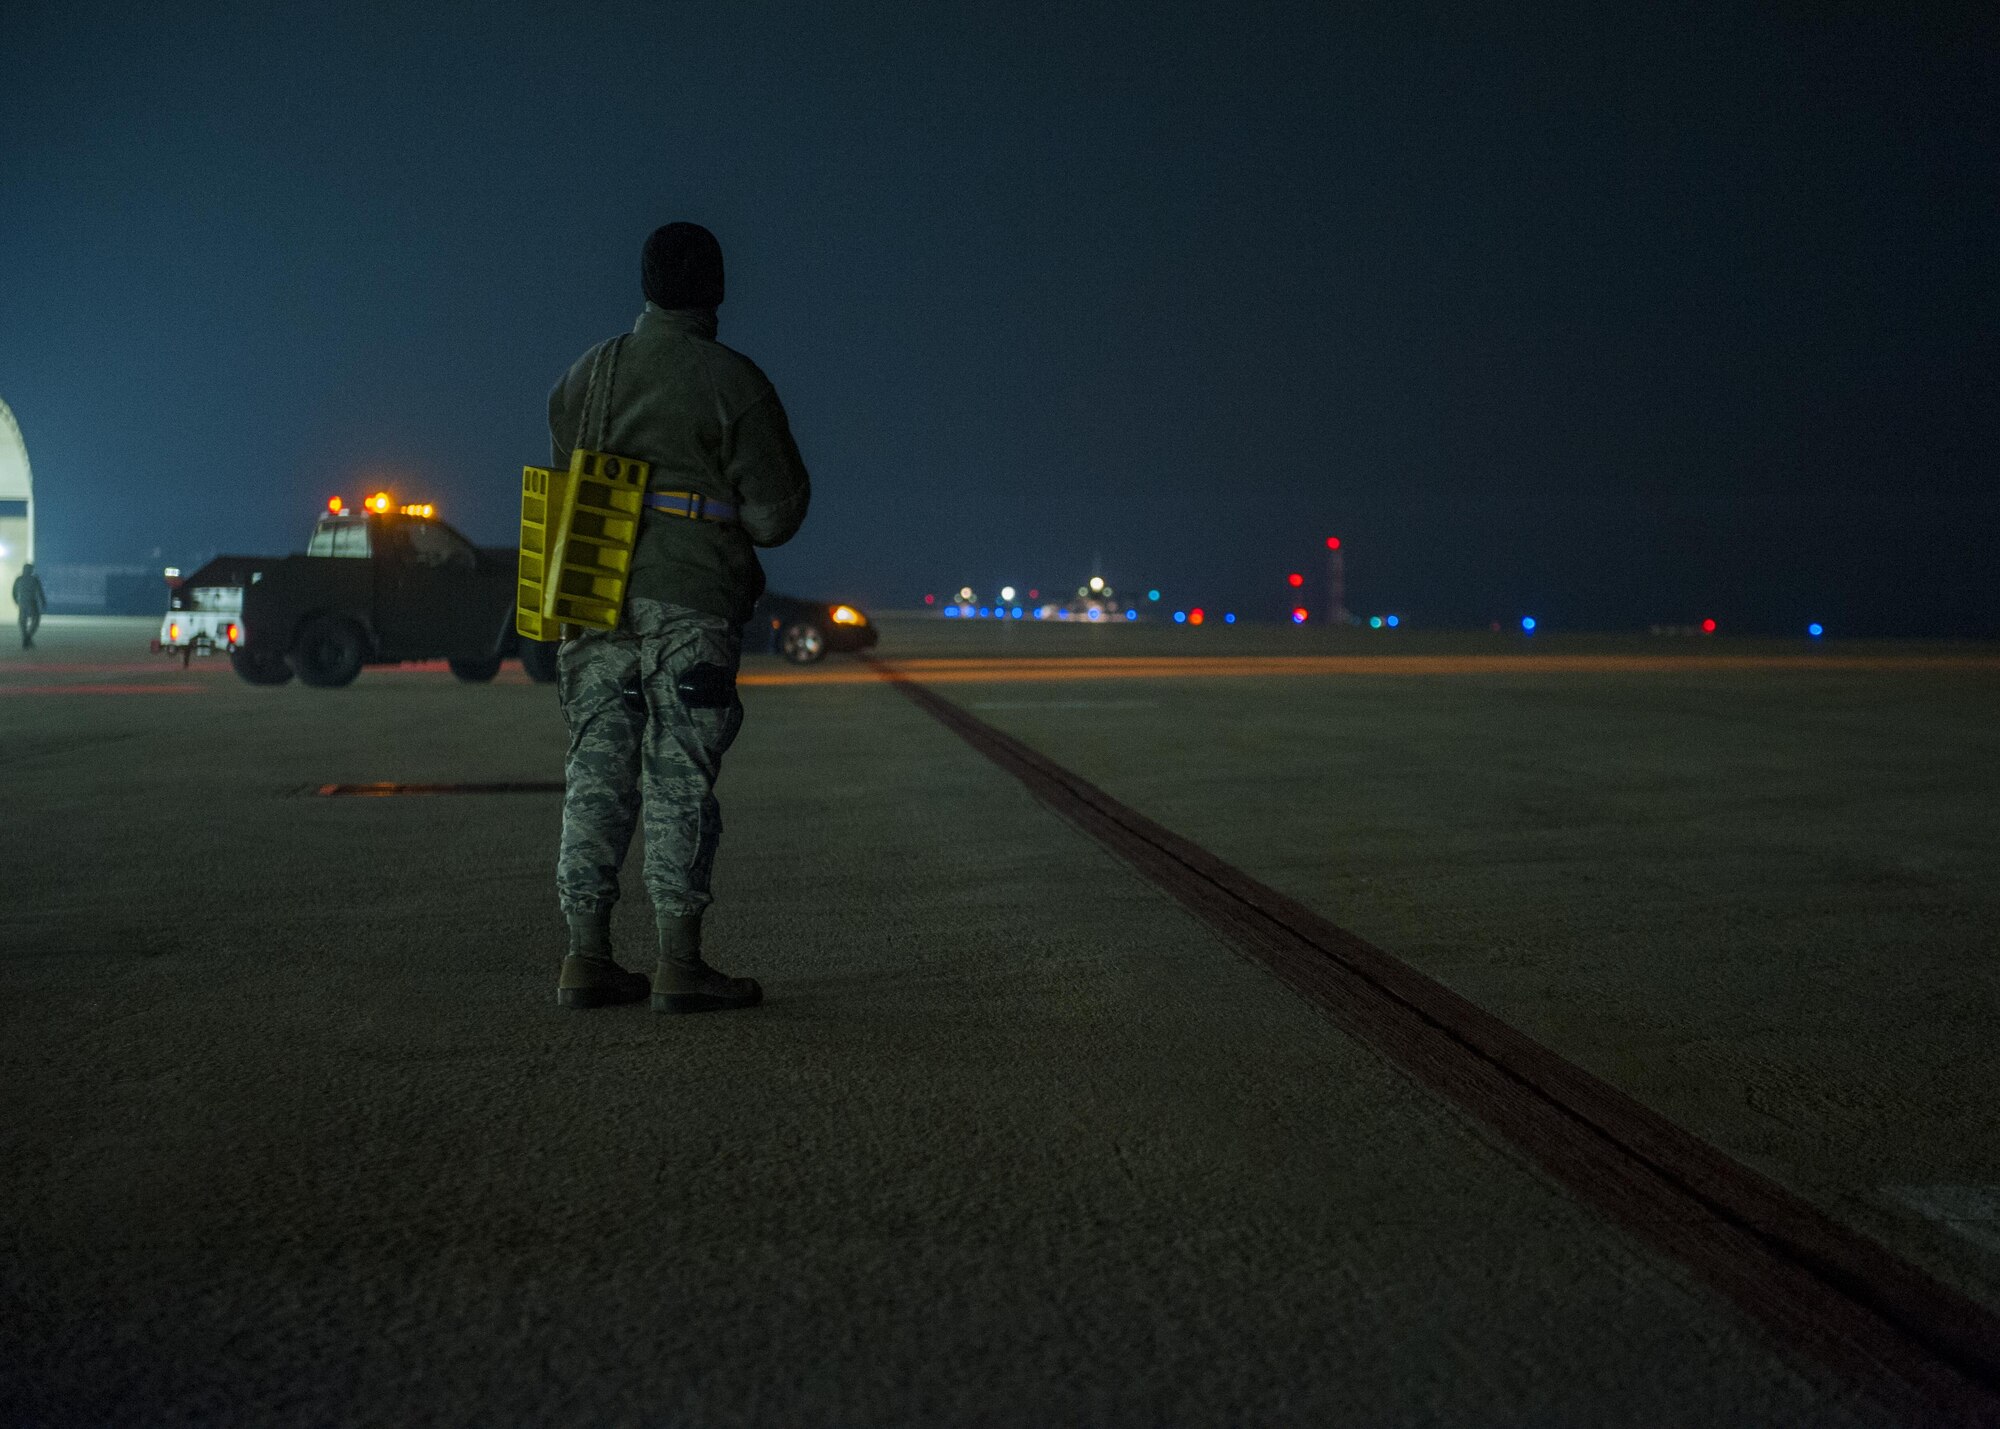 An Airman with the Wisconsin Air National Guard’s 115th Fighter Wing watches as the last of the unit’s F-16 Fighting Falcons taxi toward the end of the runway at Kunsan Air Base, Republic of Korea, Nov. 4, 2017. The aircraft and Airmen assigned to the 115th spent approximately three months on the Korean Peninsula in support of U.S. Pacific Command’s priority to secure and maintain peace in the Indo-Asia-Pacific region. (U.S. Air Force photo by Capt. Christopher Mesnard)